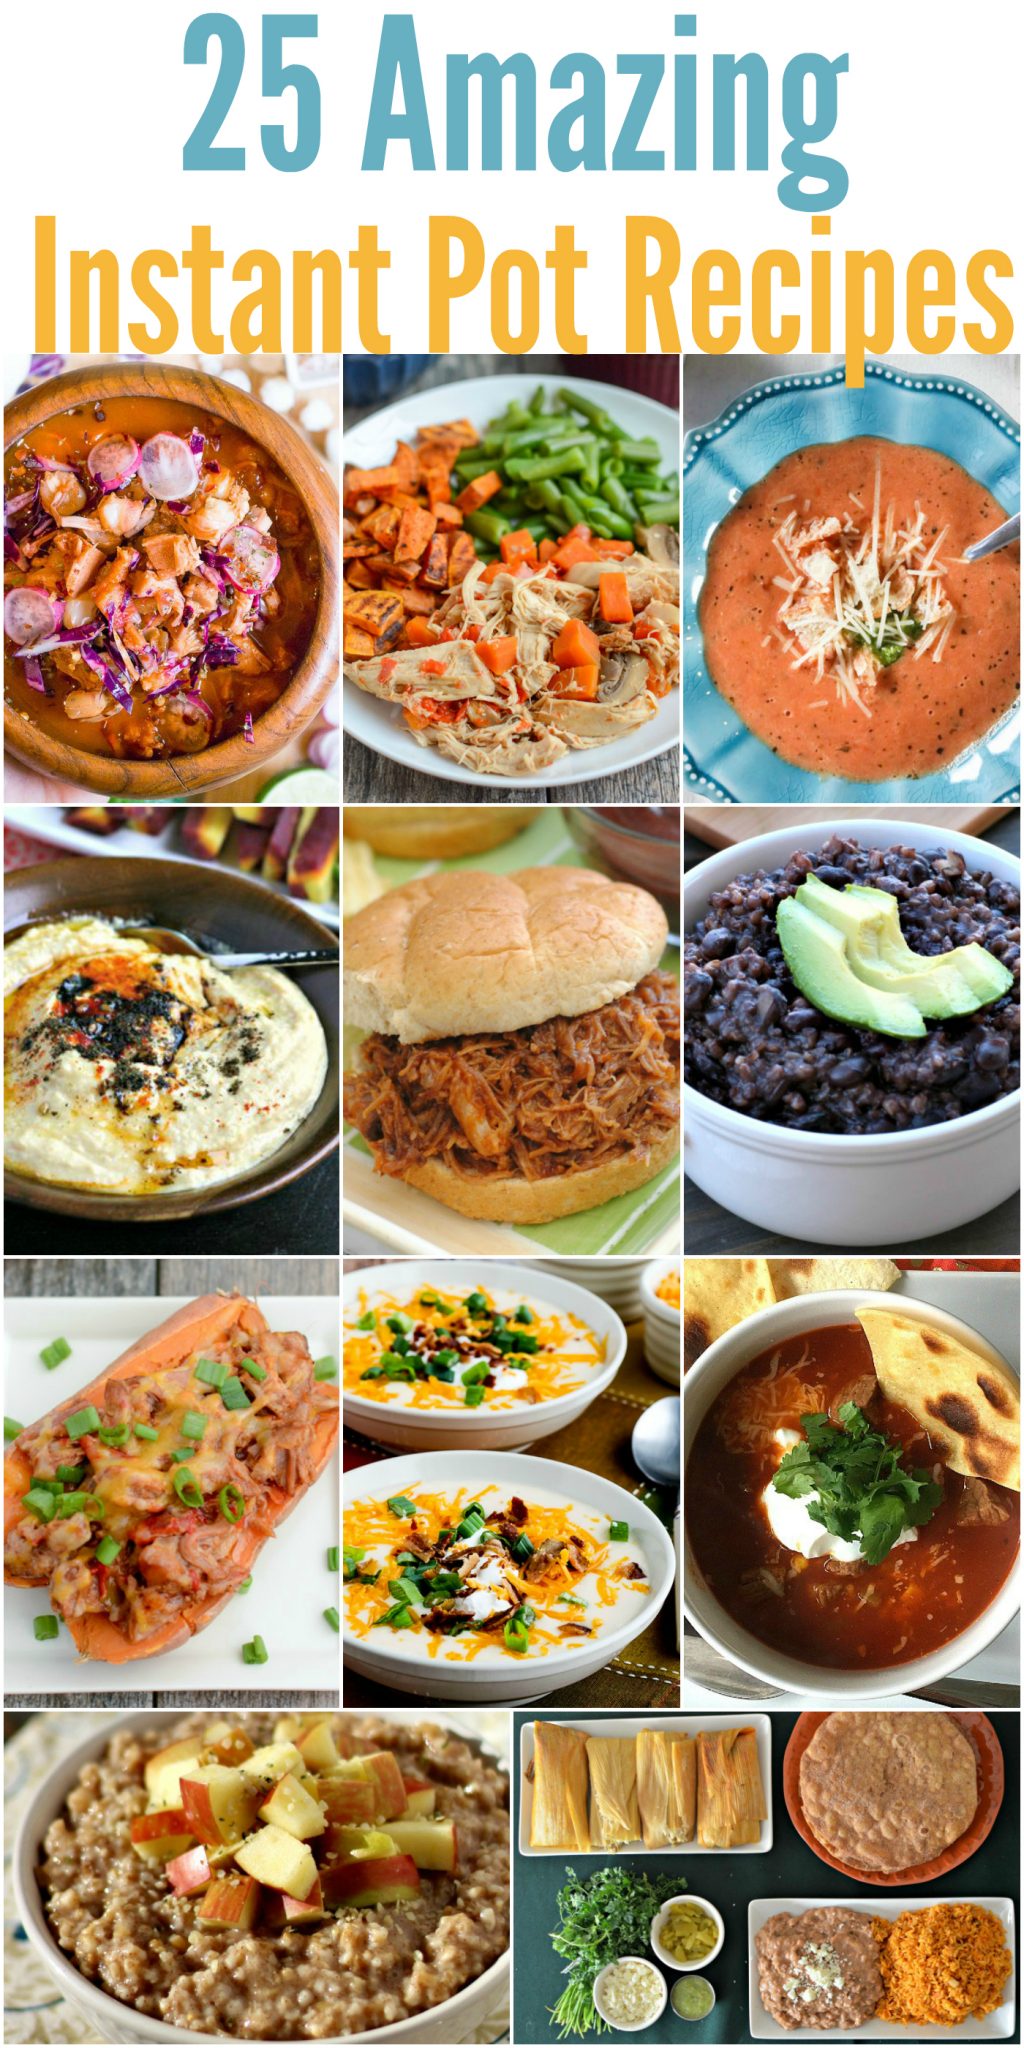 25 Amazing Instant Pot Recipes - Quick, delicious soups, main dishes, desserts and more that your family will love!